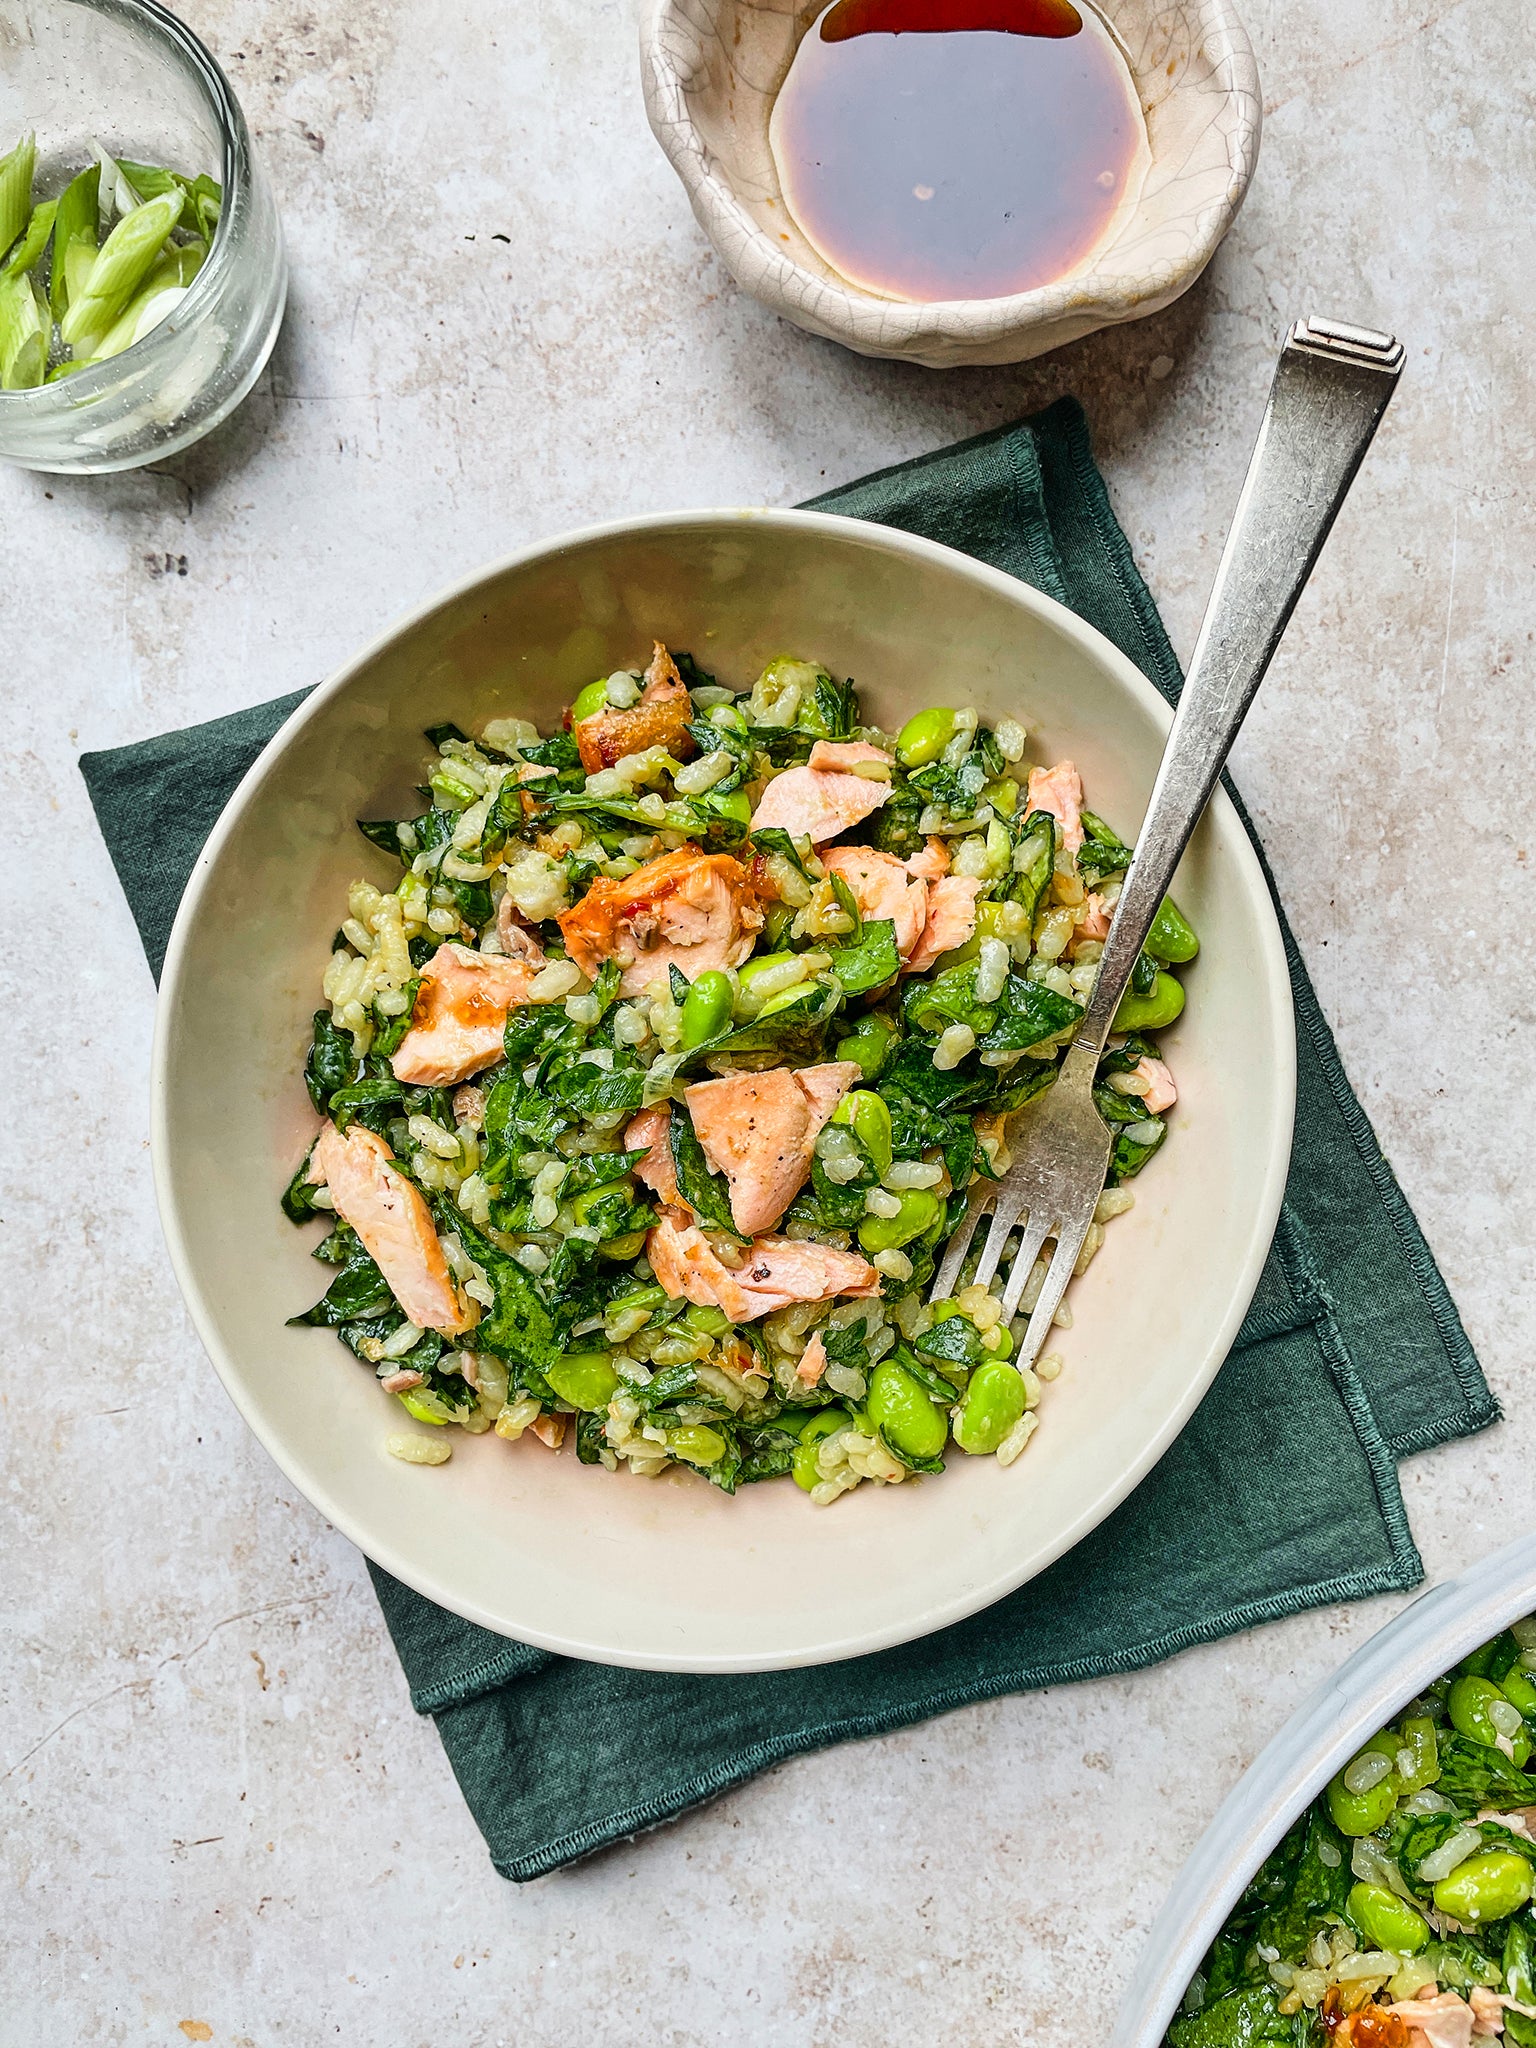 This salad has less than 500 calories and is a source of protein and fibre